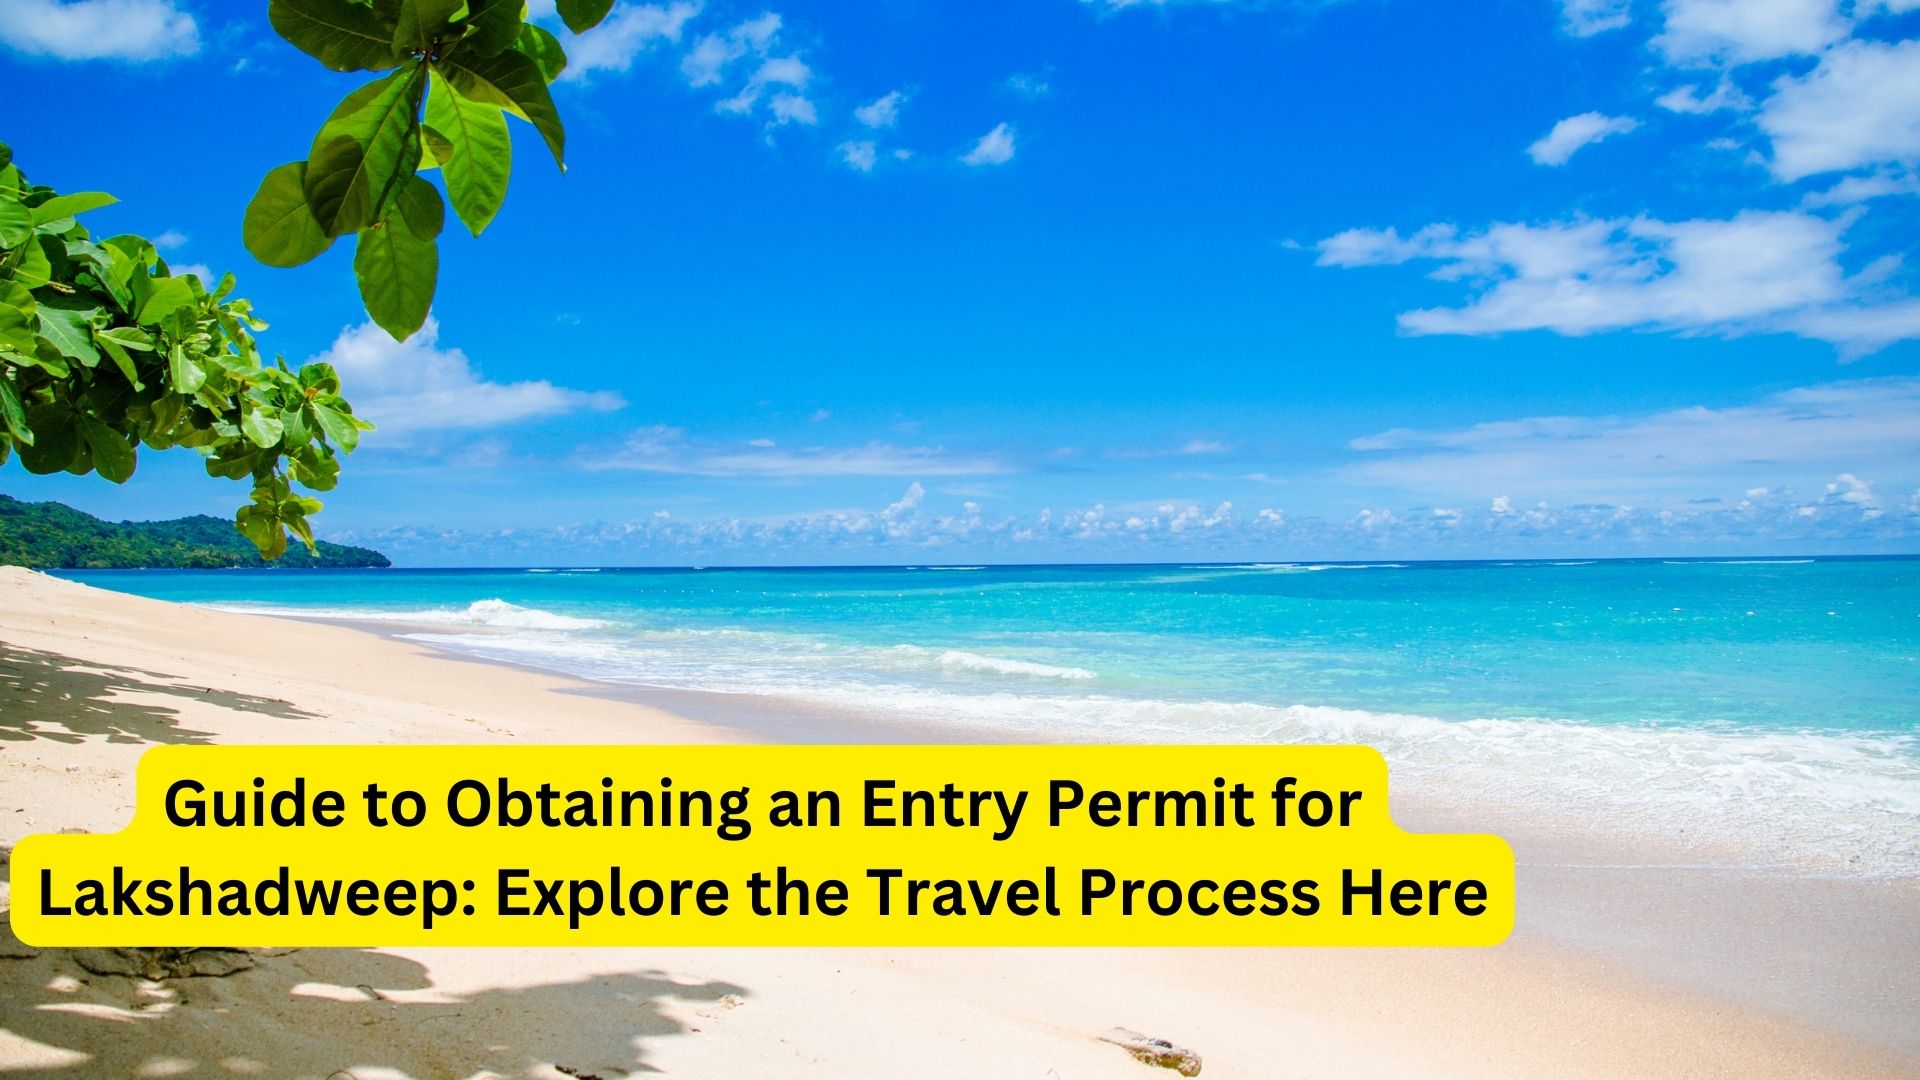 Guide to Obtaining an Entry Permit for Lakshadweep: Explore the Travel Process Here